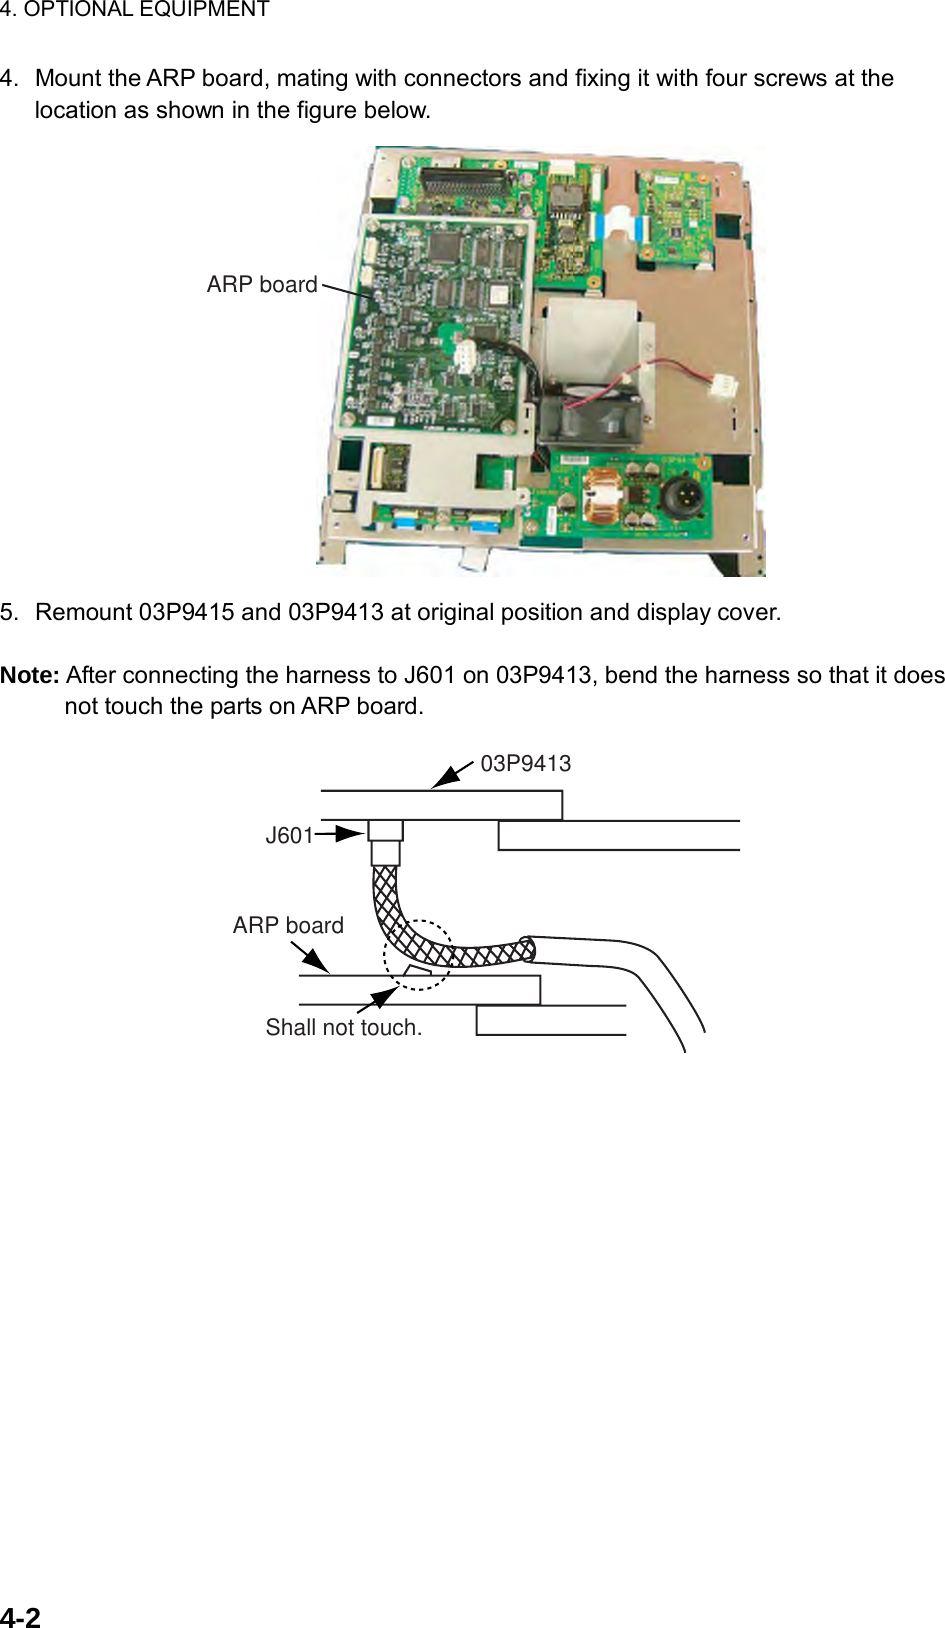 4. OPTIONAL EQUIPMENT  4-2  4.  Mount the ARP board, mating with connectors and fixing it with four screws at the location as shown in the figure below.   ARP board 5.  Remount 03P9415 and 03P9413 at original position and display cover.  Note: After connecting the harness to J601 on 03P9413, bend the harness so that it does not touch the parts on ARP board. J601ARP board03P9413Shall not touch. 